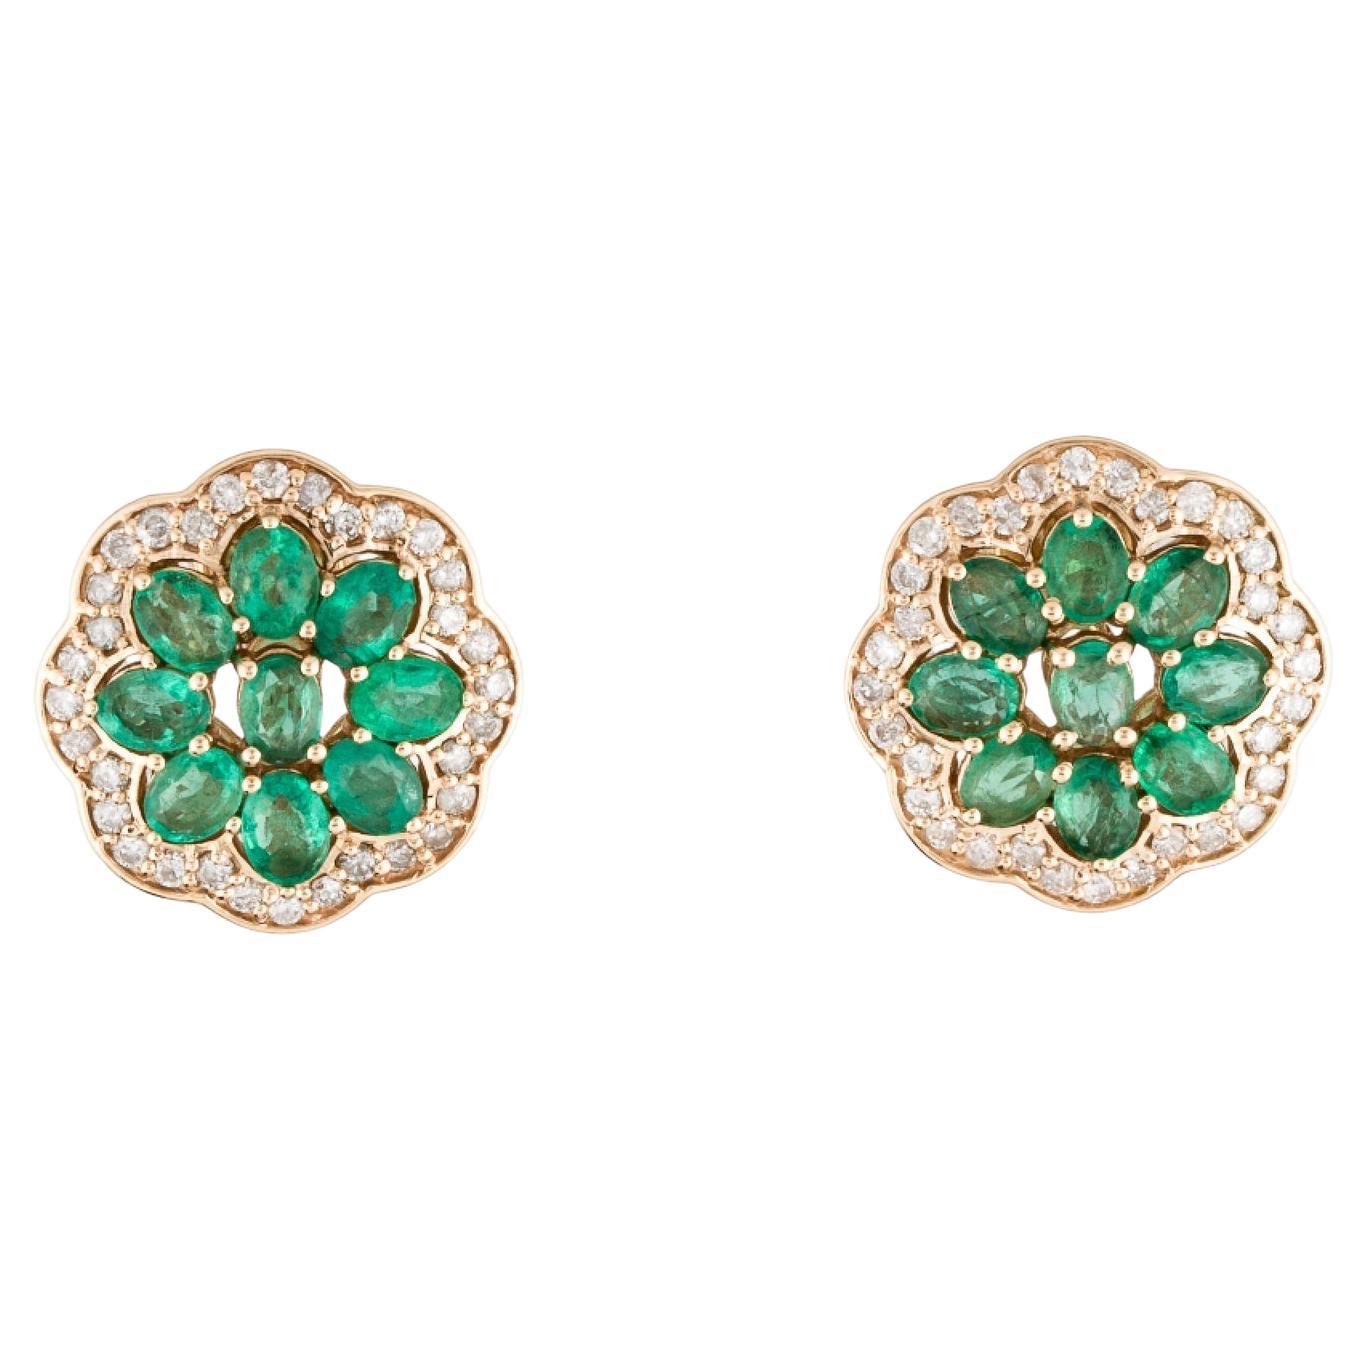 14K Emerald & Diamond Stud Earrings- Exquisite Gemstone Jewelry Timeless Glamour For Sale